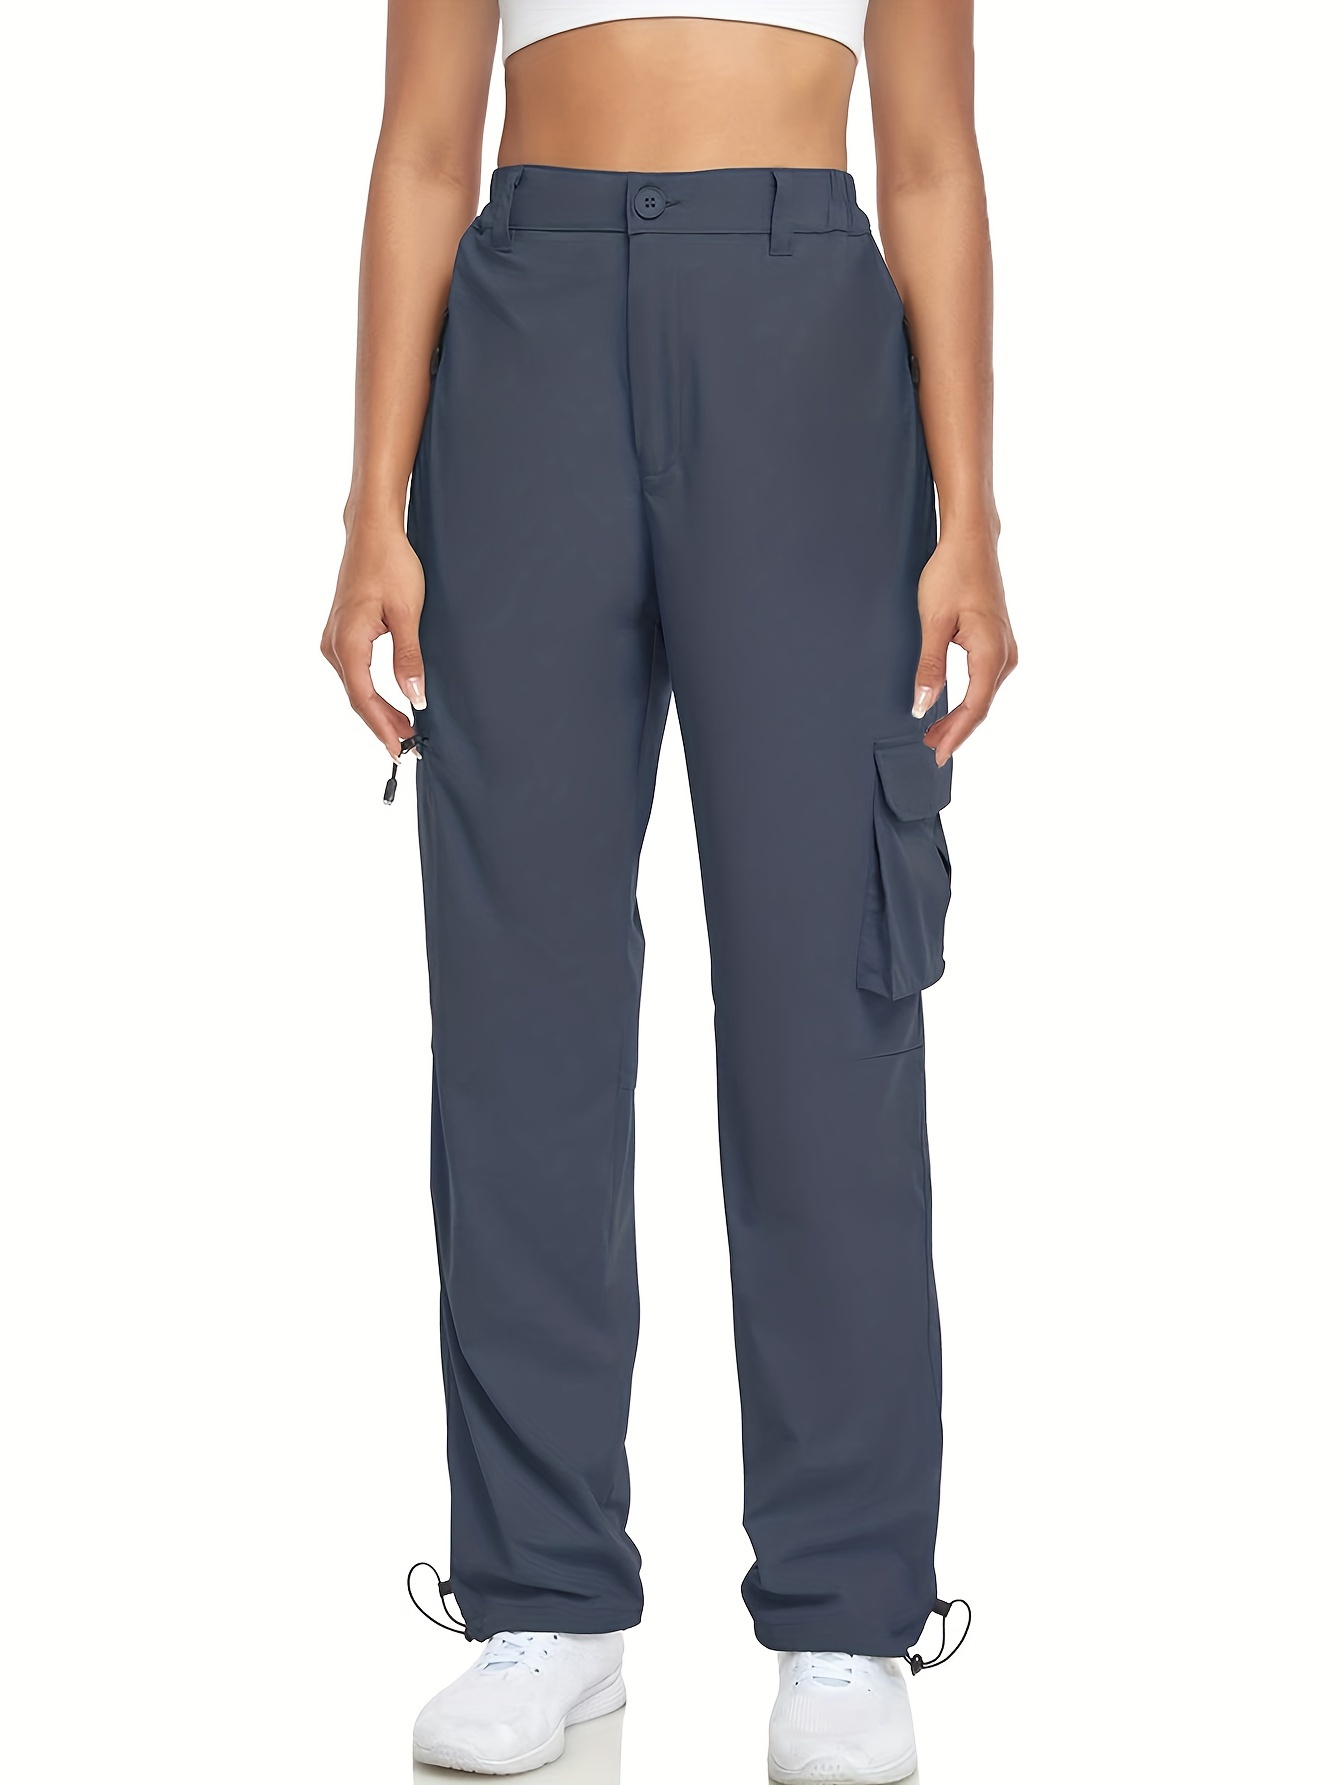 Women's Hiking Cargo Pants, Lightweight Sports Pants With Multi-Pockets,  Zippered Quick Dry UPF 50+ Tapered Joggers